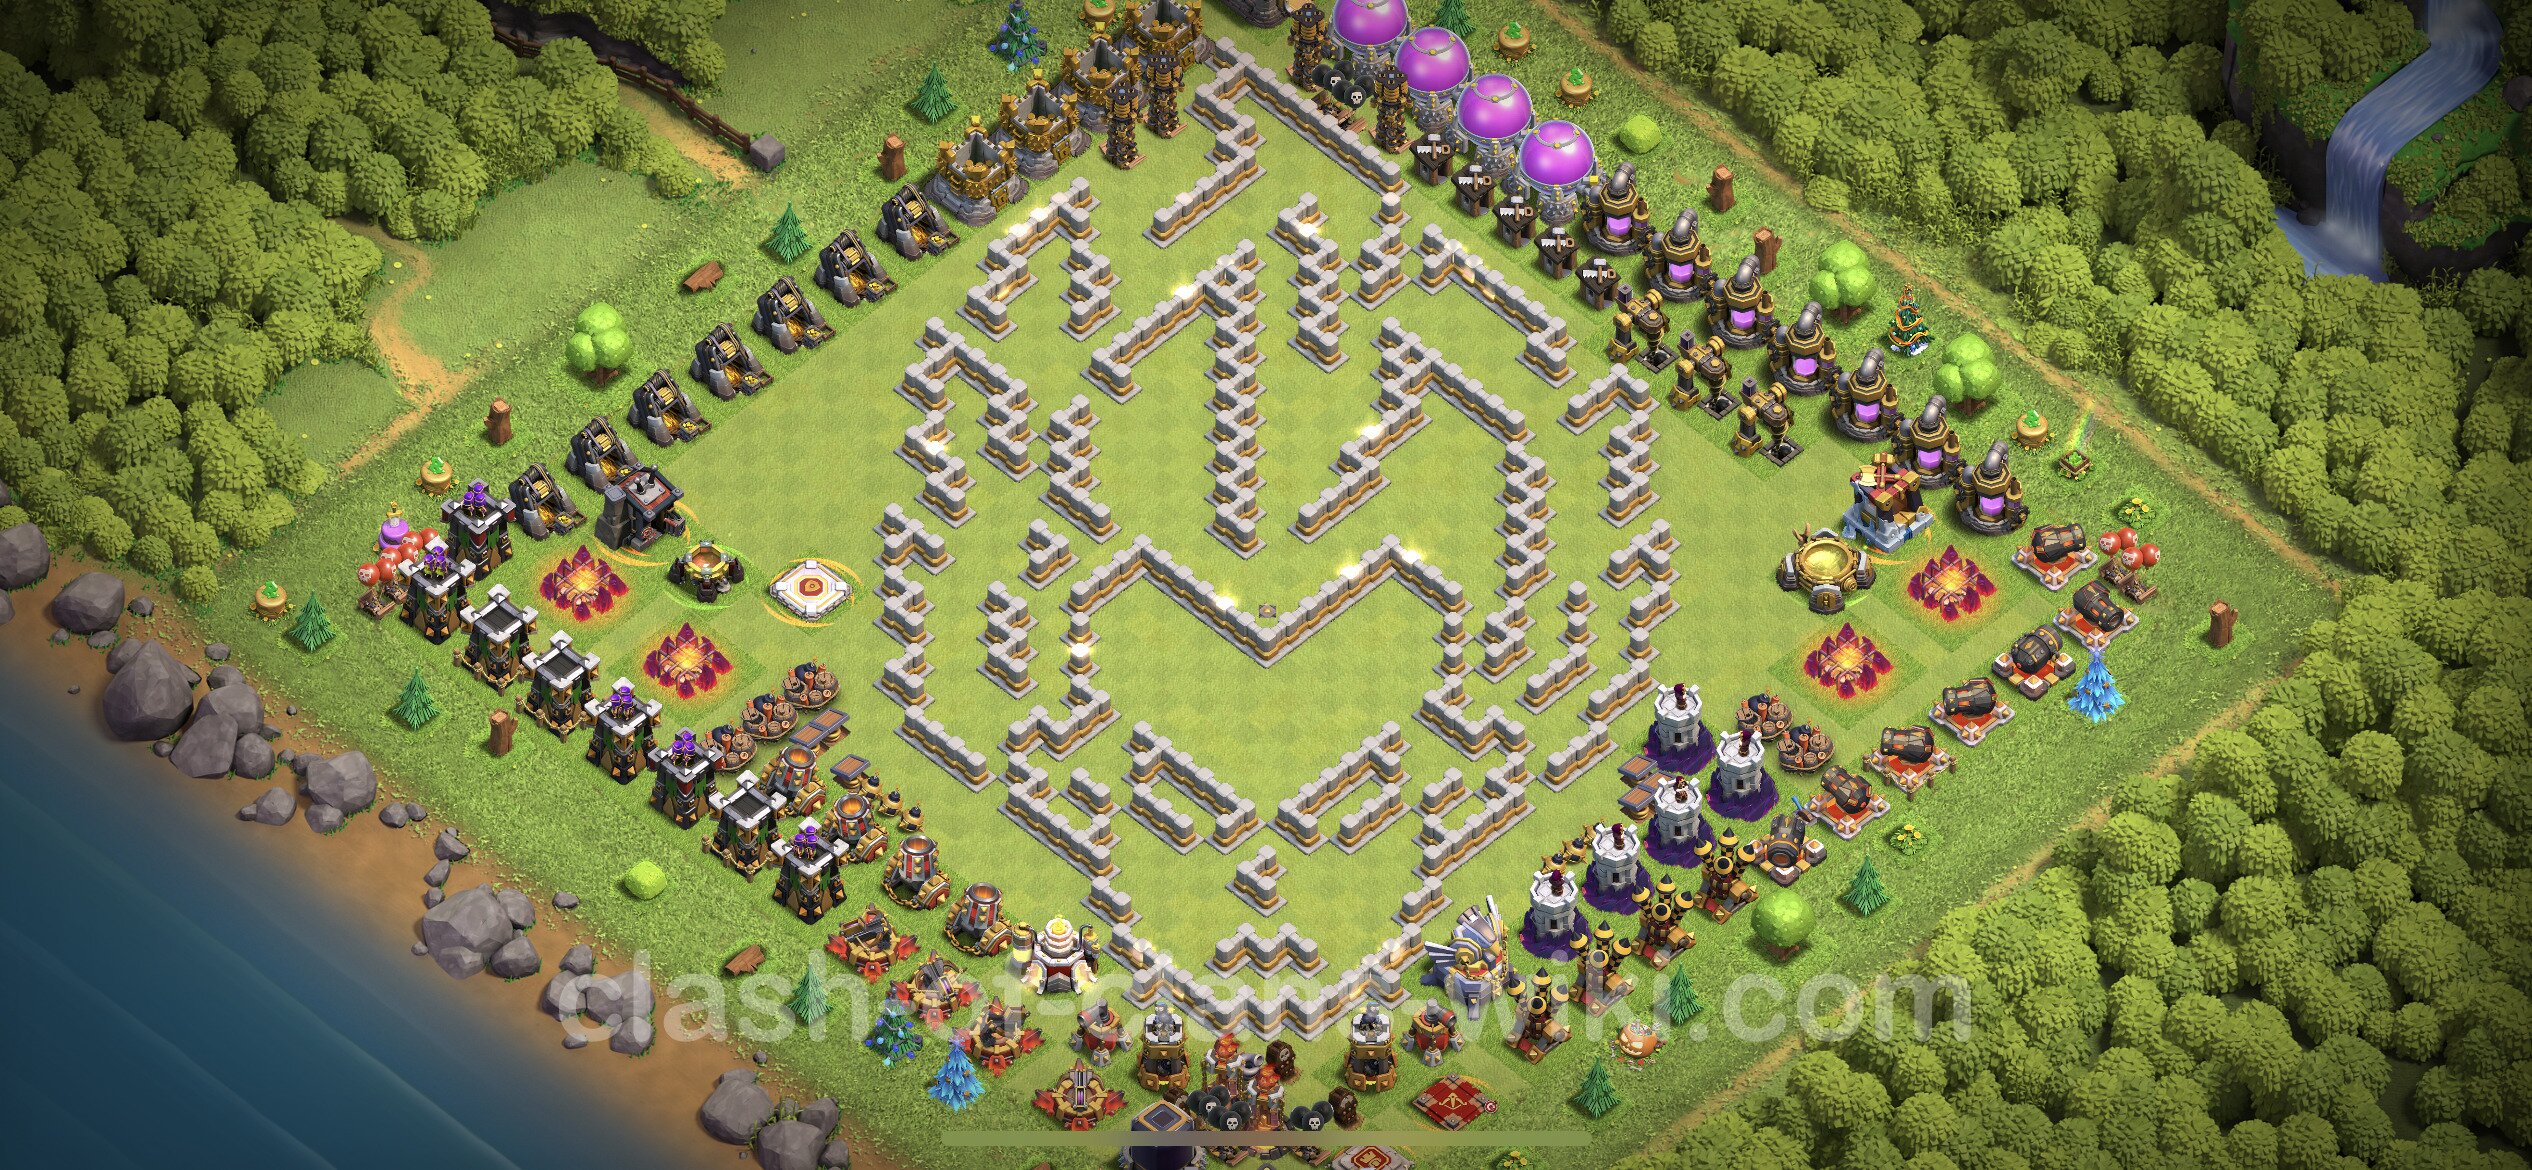 Funny Troll Base TH11 with Link - Town Hall Level 11 Art Base Copy, #14